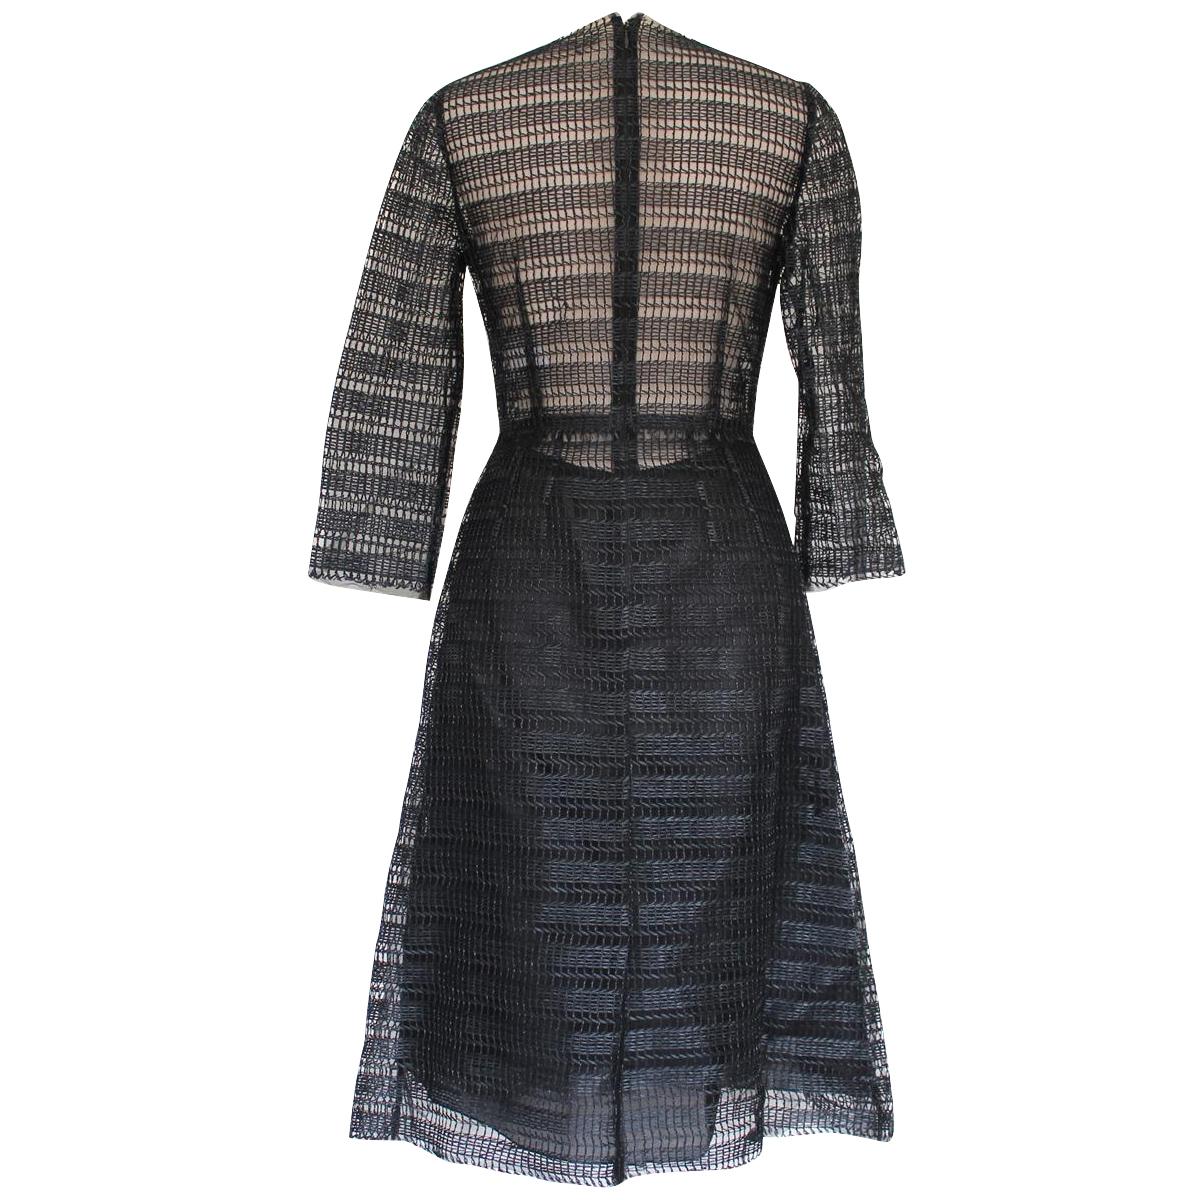 Wonderful raffia dress by Dolce & Gabbana
Viscose (60%) Polyamide
Black color
Transparent
Long sleeves
Total length cm 106 (41.7 inches)
Shoulder cm 35 (13.7 inches)
Worldwide express shipping included in the price !